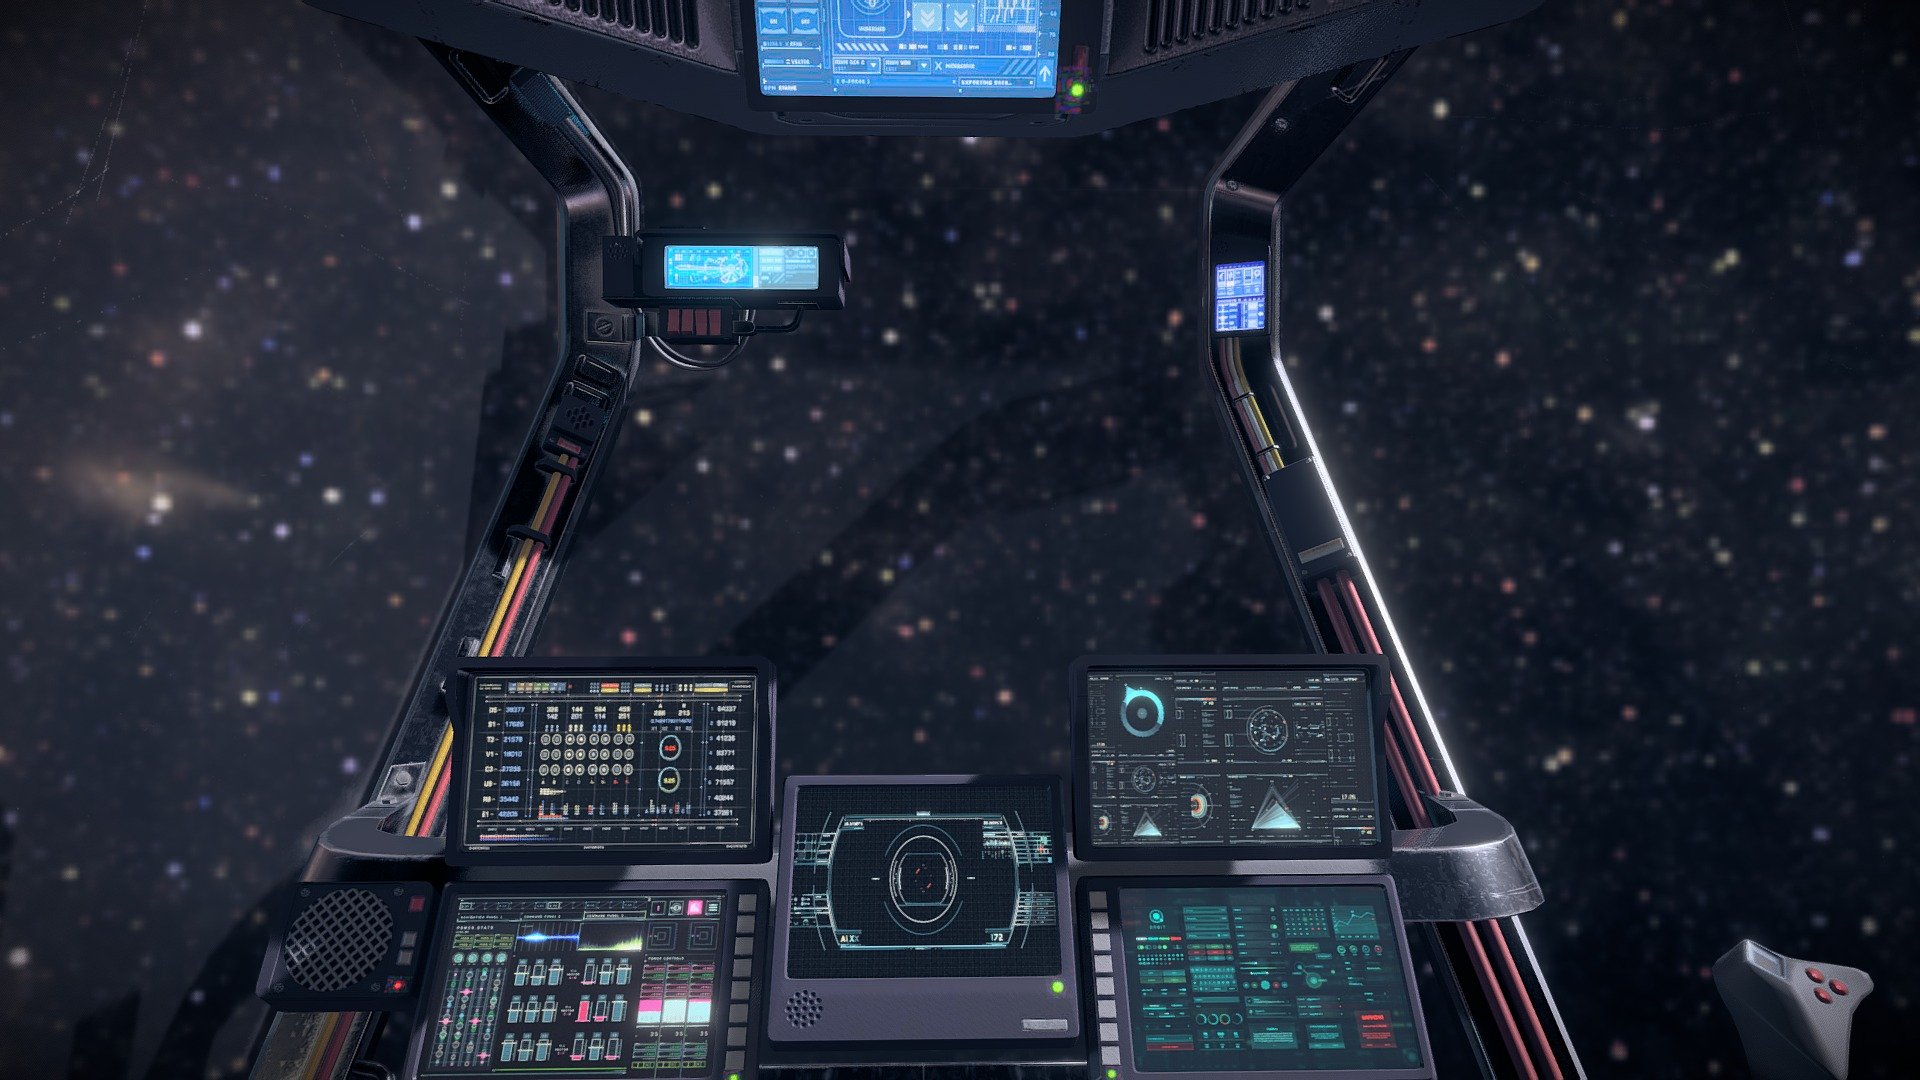 AAA Quality, highly detailed sci-fi cockpit, perfect for any space-sim or VR experience. With 4K resolution PBR Textures.

This is a game ready, optimized 3d asset. It uses the PBR texture standard for full compatibility with any modern game engine, rendering software or 3d program. If you have any questions, dont hesitate to send me a message.

This Package contains:

3D Model in multiple formats (.max, .fbx, .obj, .3ds)
4K PBR Textures (3 sets: Cockpit, Glass, Screen, each in 2 styles (Clean and Weathered), and PSD to customize paint and seat colors)
****Textures: All textures provided in .psd or .png format. The following texture maps are included: Albedo, Normal, Metallic, Roughness, Metallic/Roughness(A), Metallic/Smoothness(A), Height, Ambient Occlusion, Emissive, Opacity(for glass) 3d model